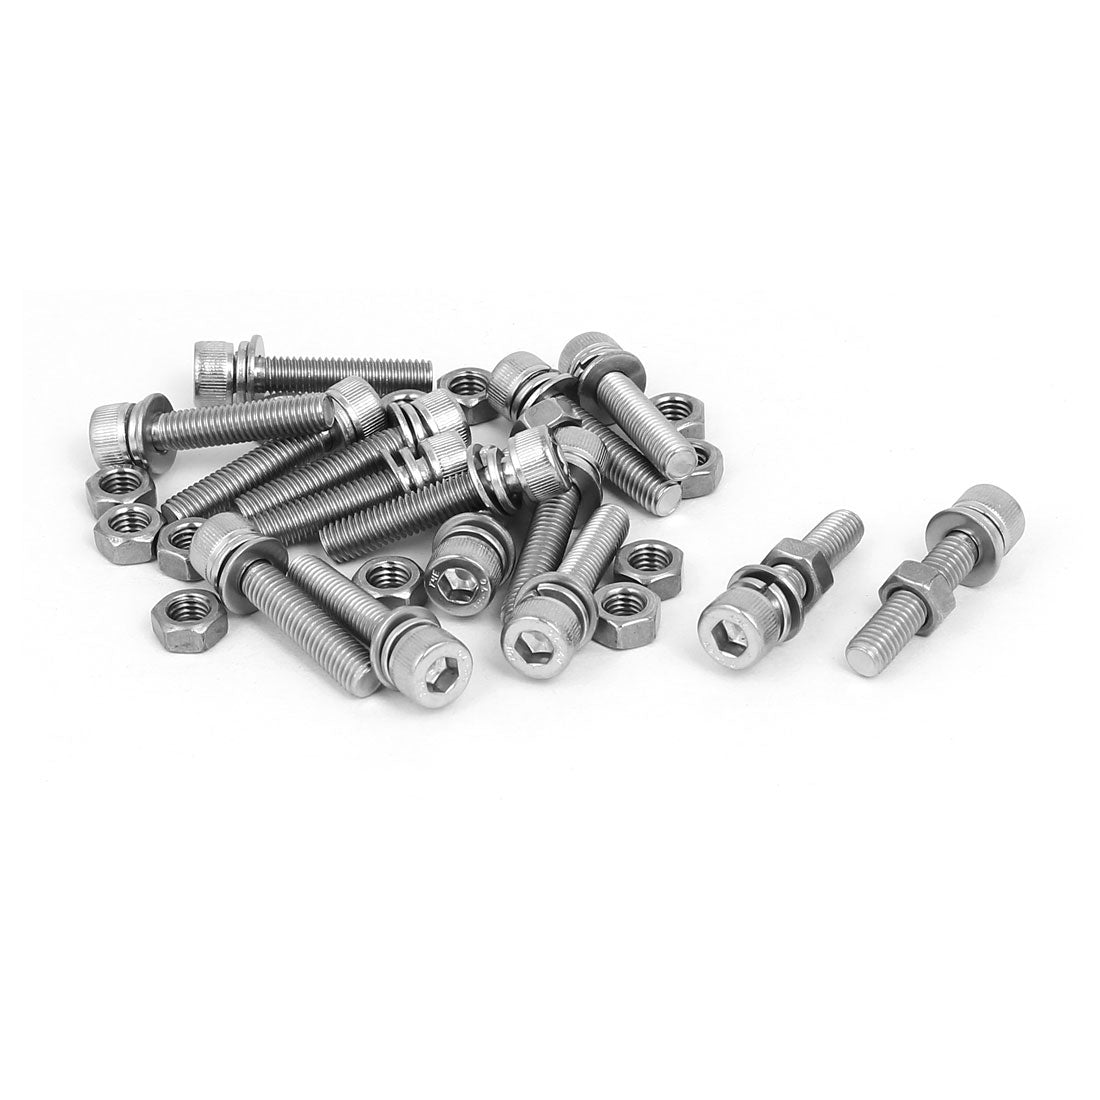 uxcell Uxcell M5 x 25mm 304 Stainless Steel Hex Socket Head Cap Screws Nuts w Washers 15 Sets